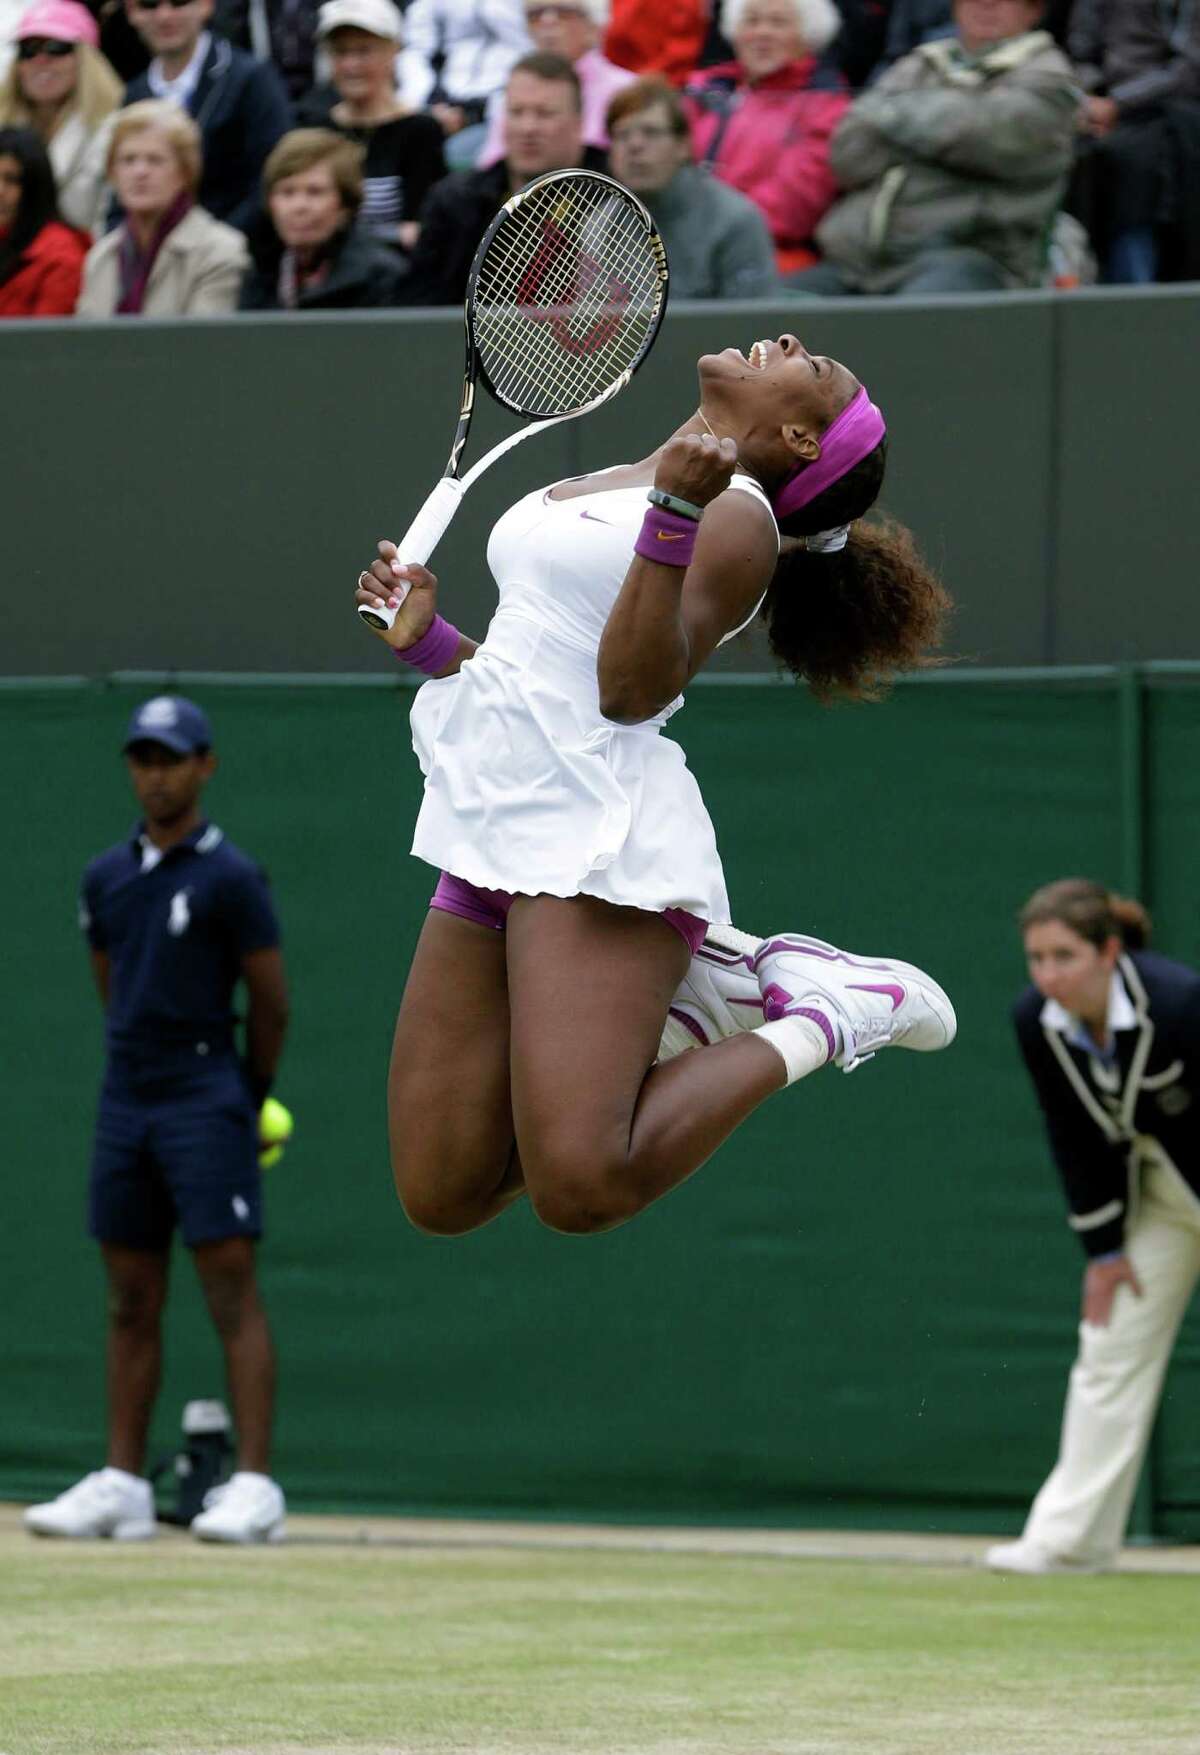 Serena Williams, who hasn't won a Grand Slam title since 2010, could collect her 14th with a victory today.